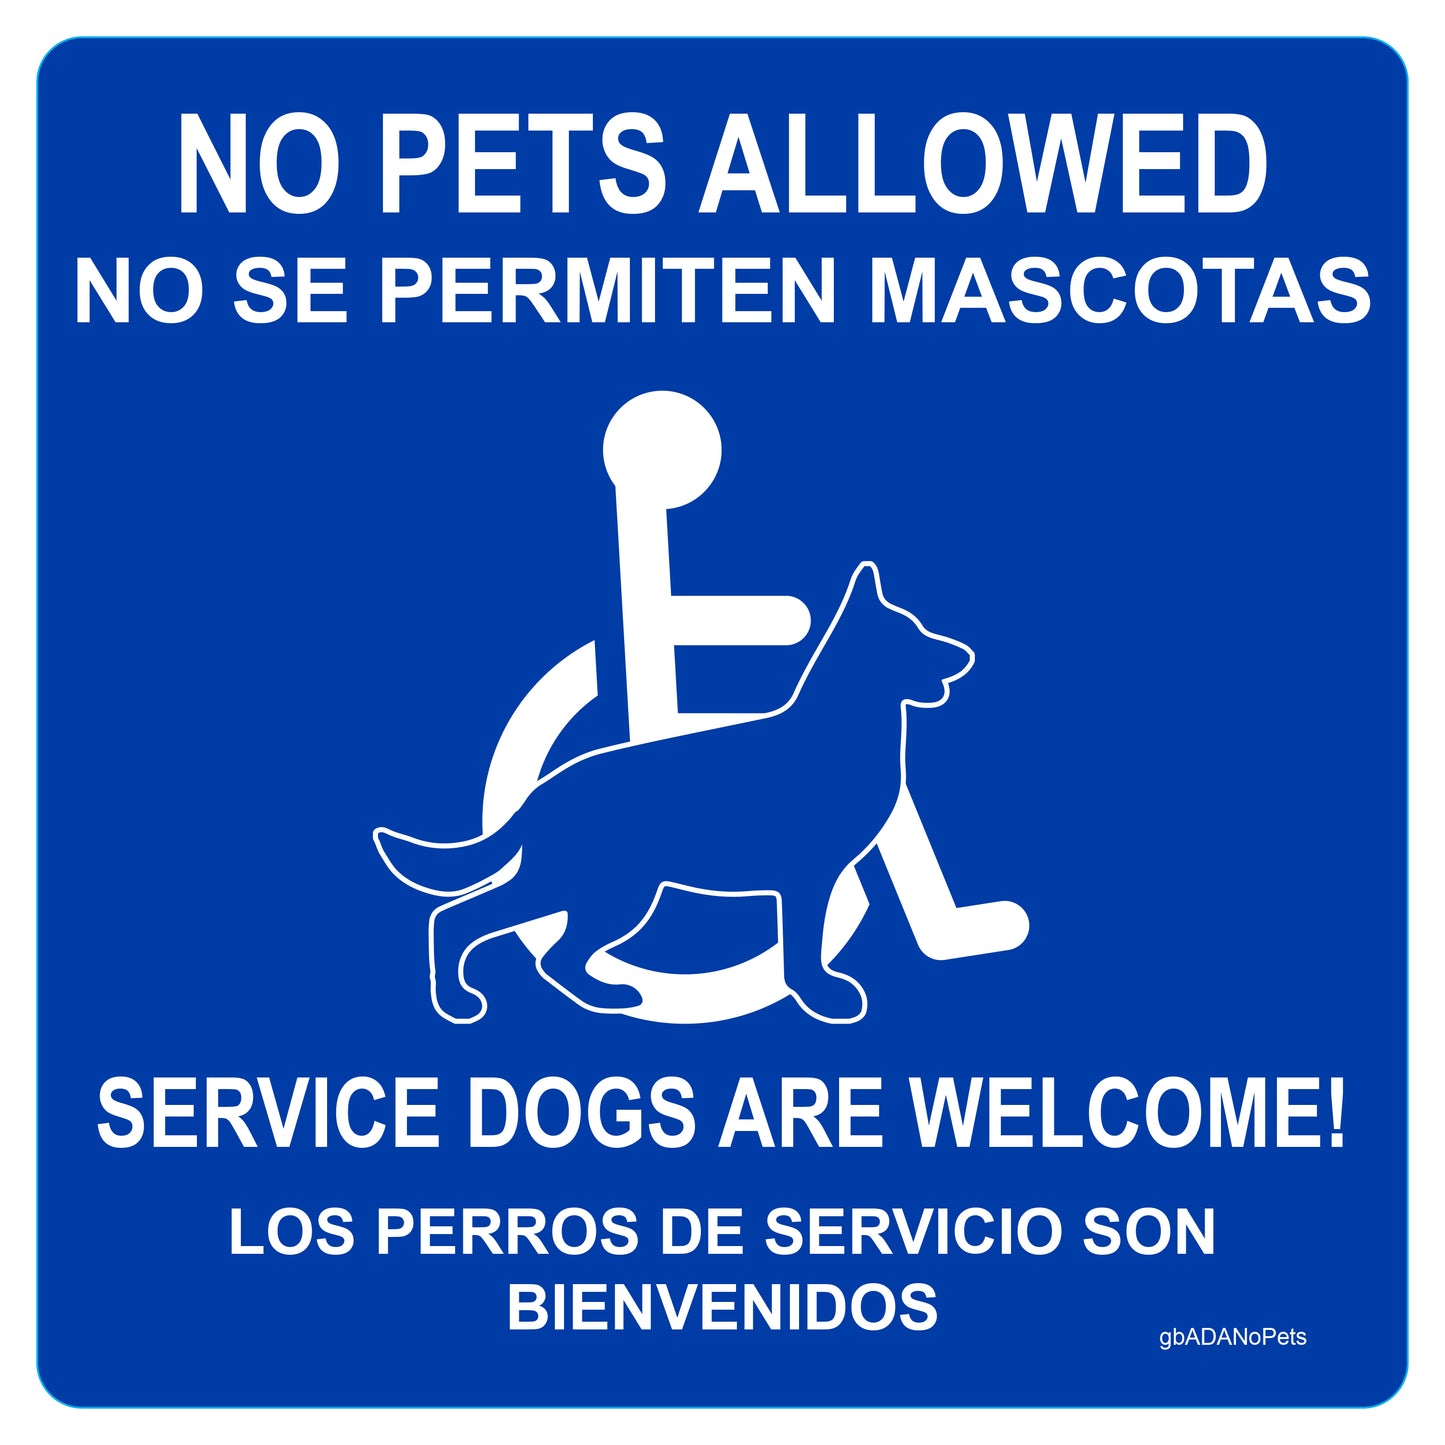 ADA No Pets Allowed Service Dogs Welcome Decal in English and Spanish. 5 inches by 5 inches in size.